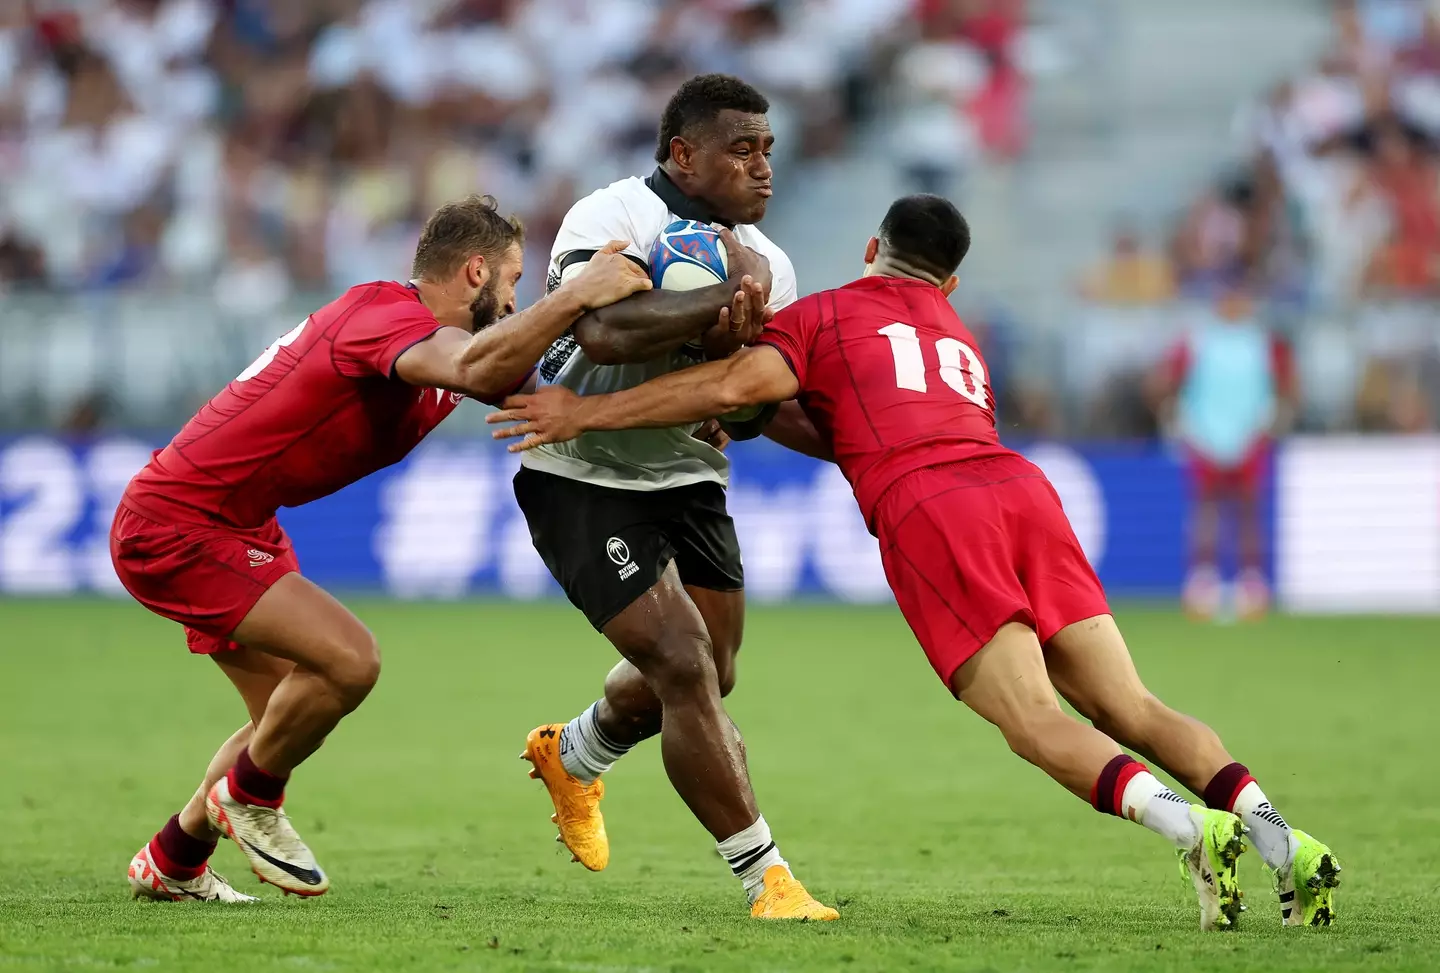 Rugby star Josua Tuisova missed his child's funeral after playing in Fiji's World Cup win over Georgia.